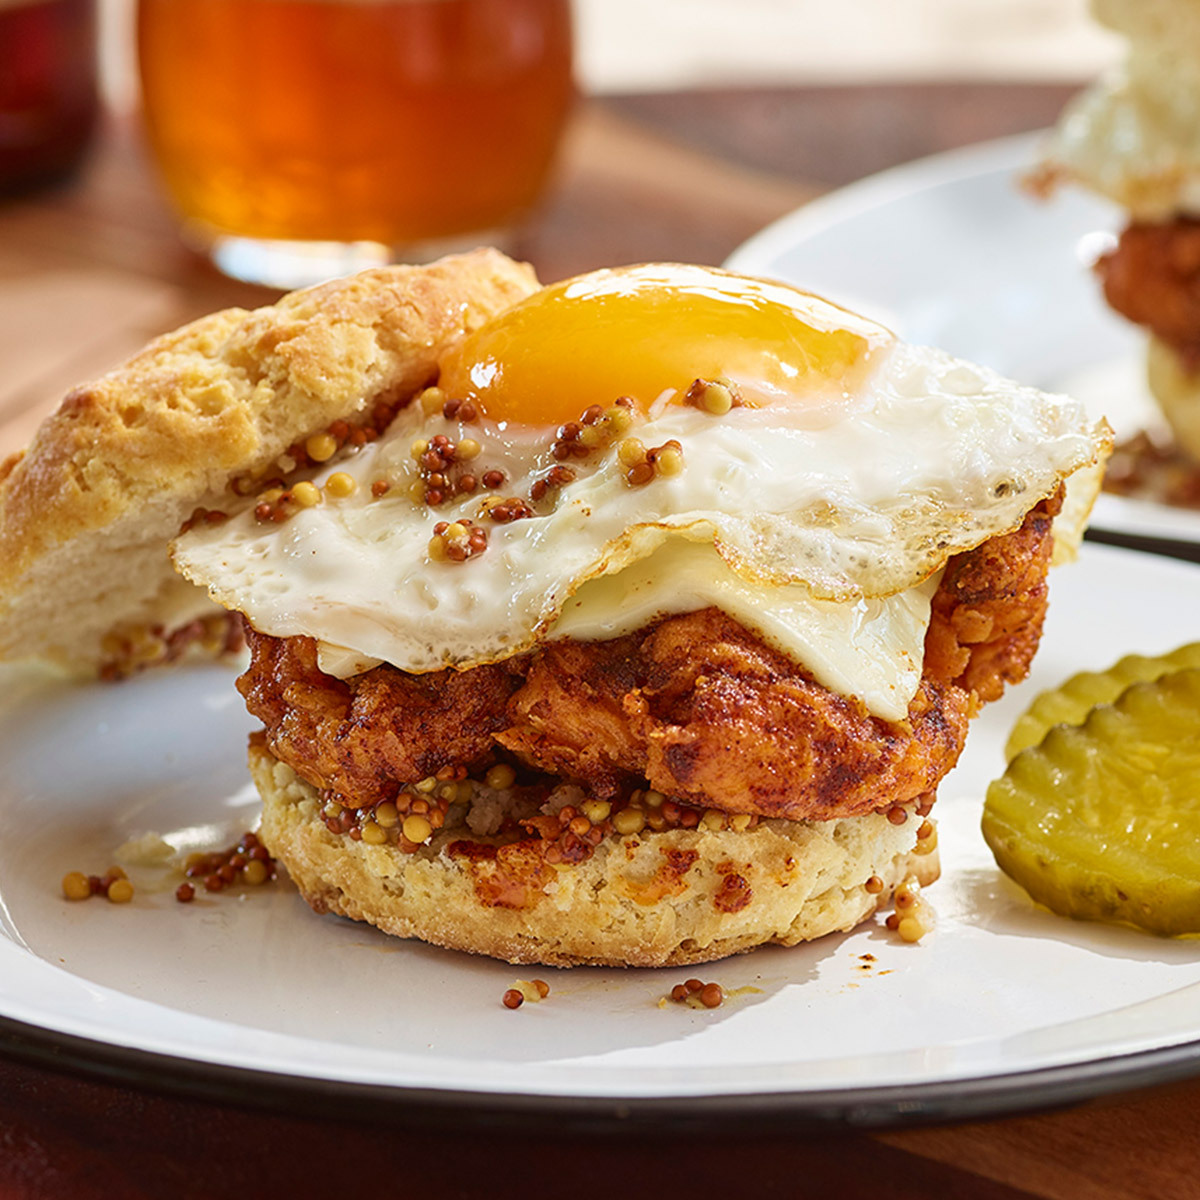 Nashville hot chicken with fried egg on top